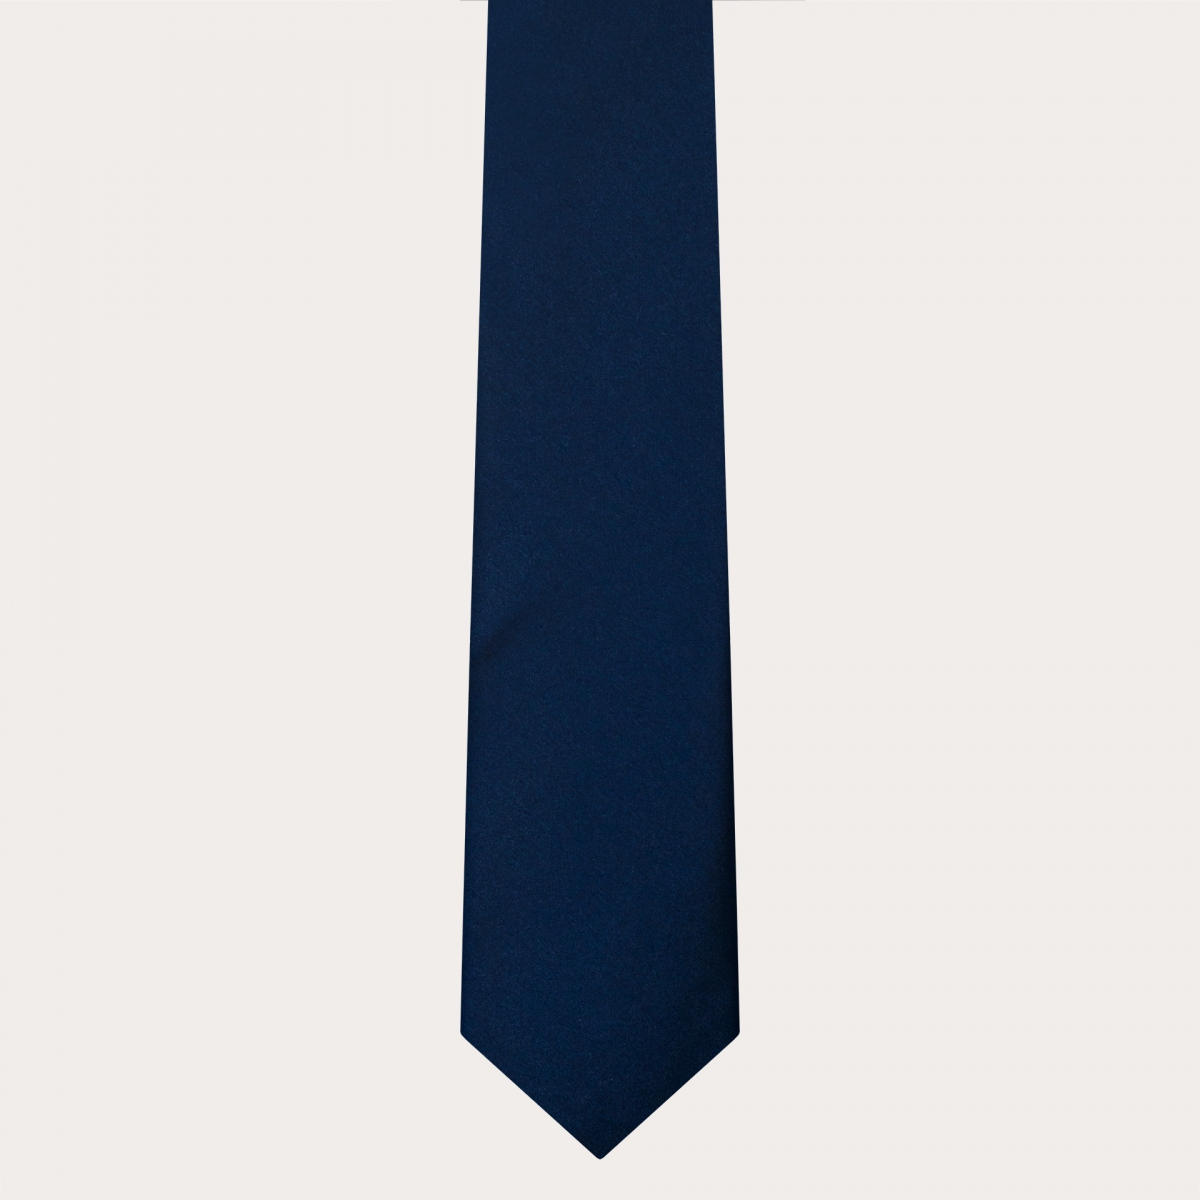 BRUCLE Silk satin ceremony set, blue tie and pocket square